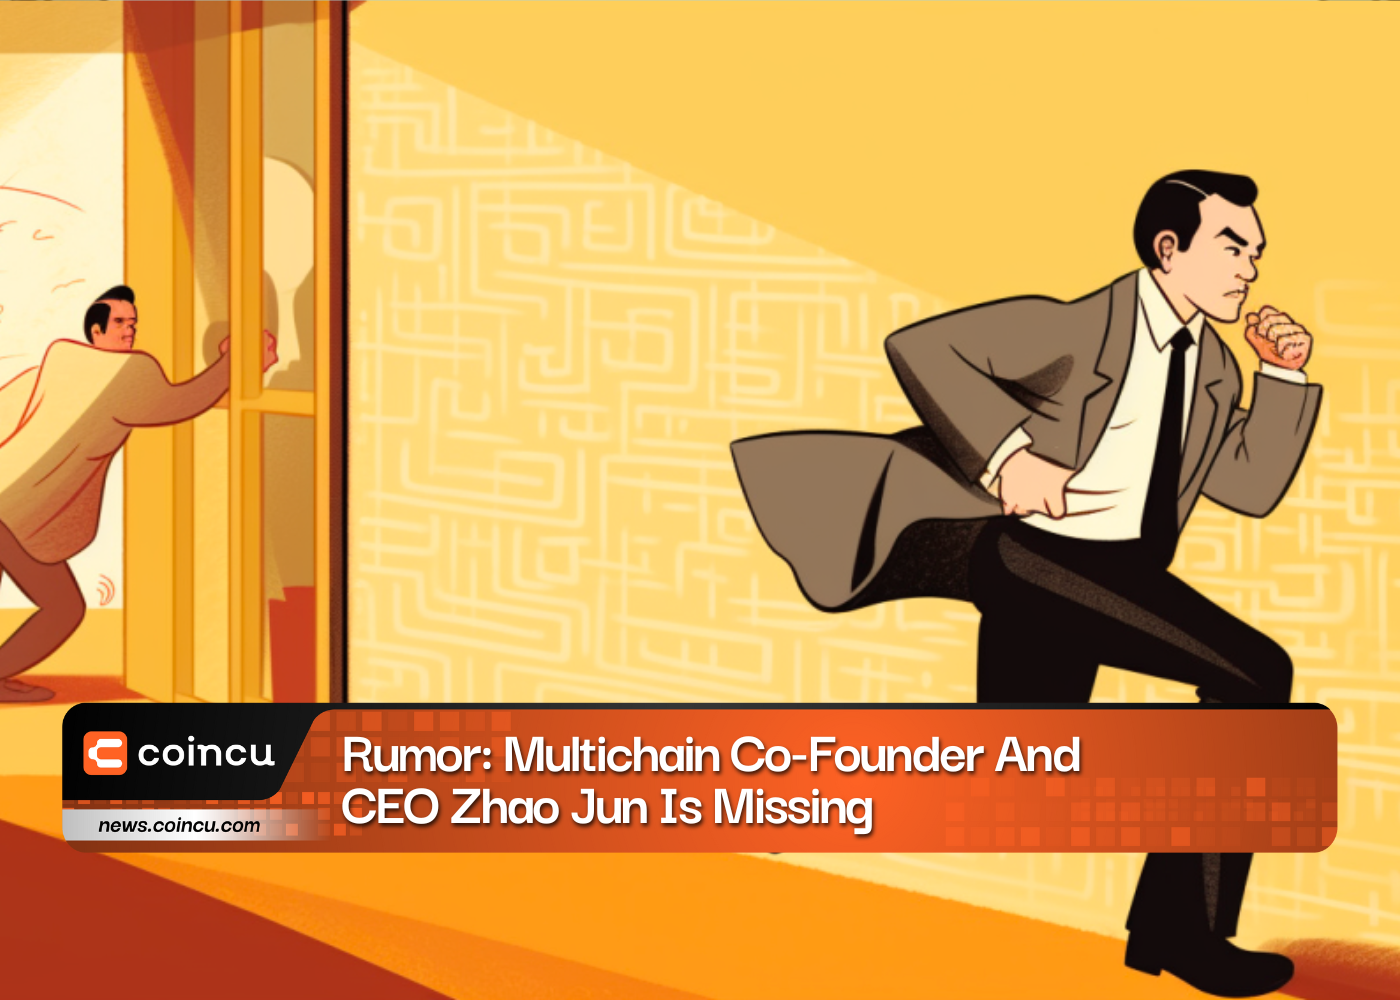 Rumor: Multichain Co-Founder And CEO Zhao Jun Is Missing